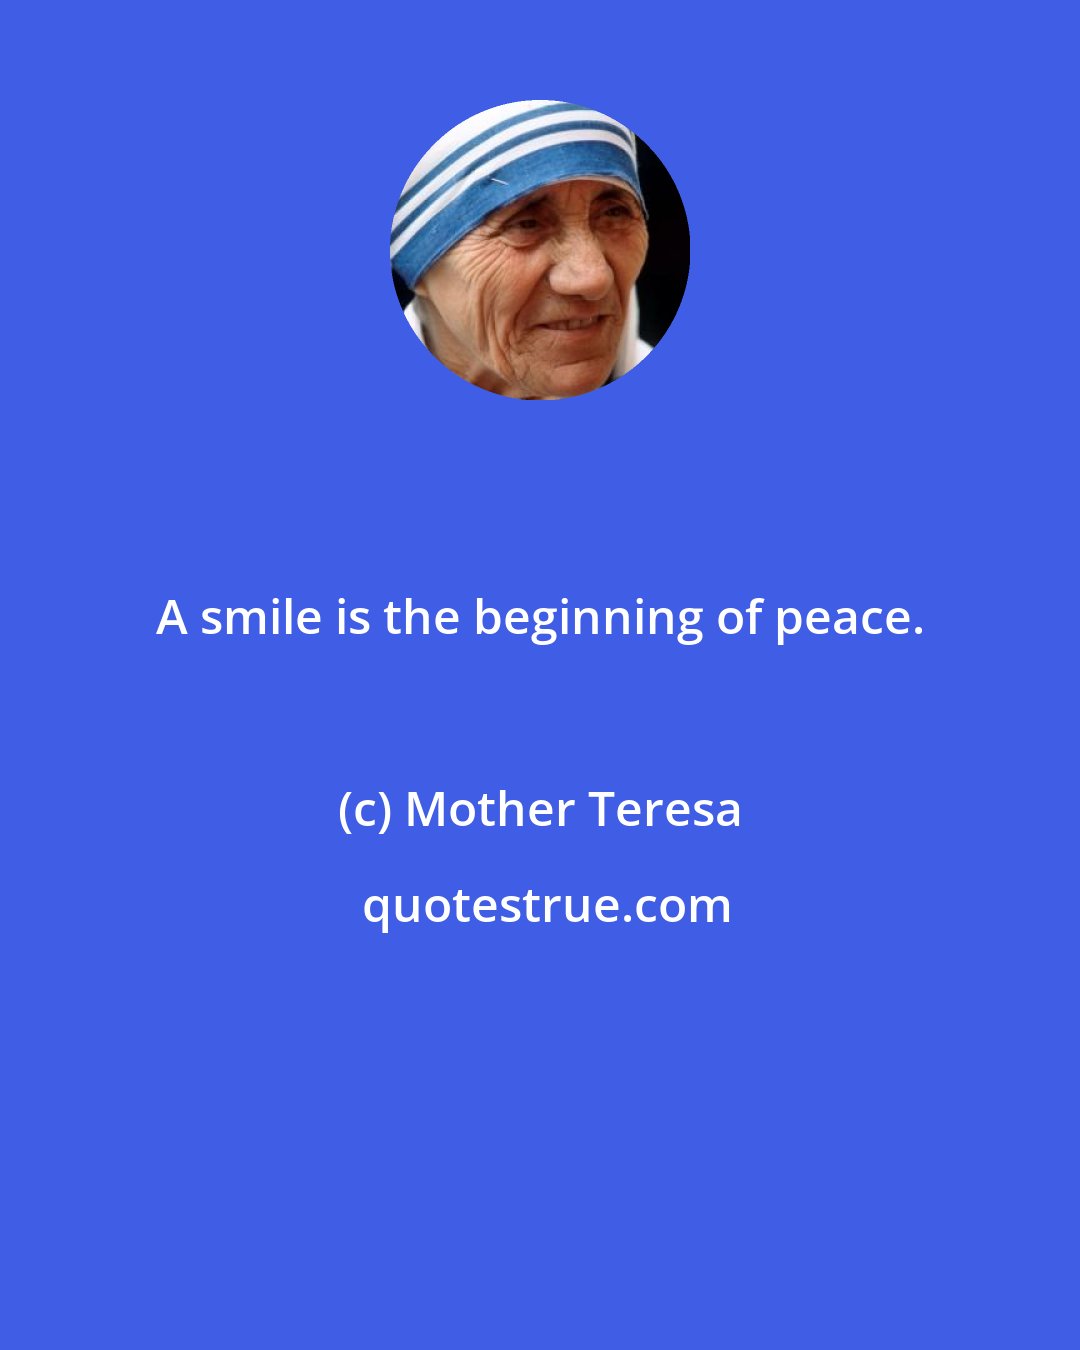 Mother Teresa: A smile is the beginning of peace.